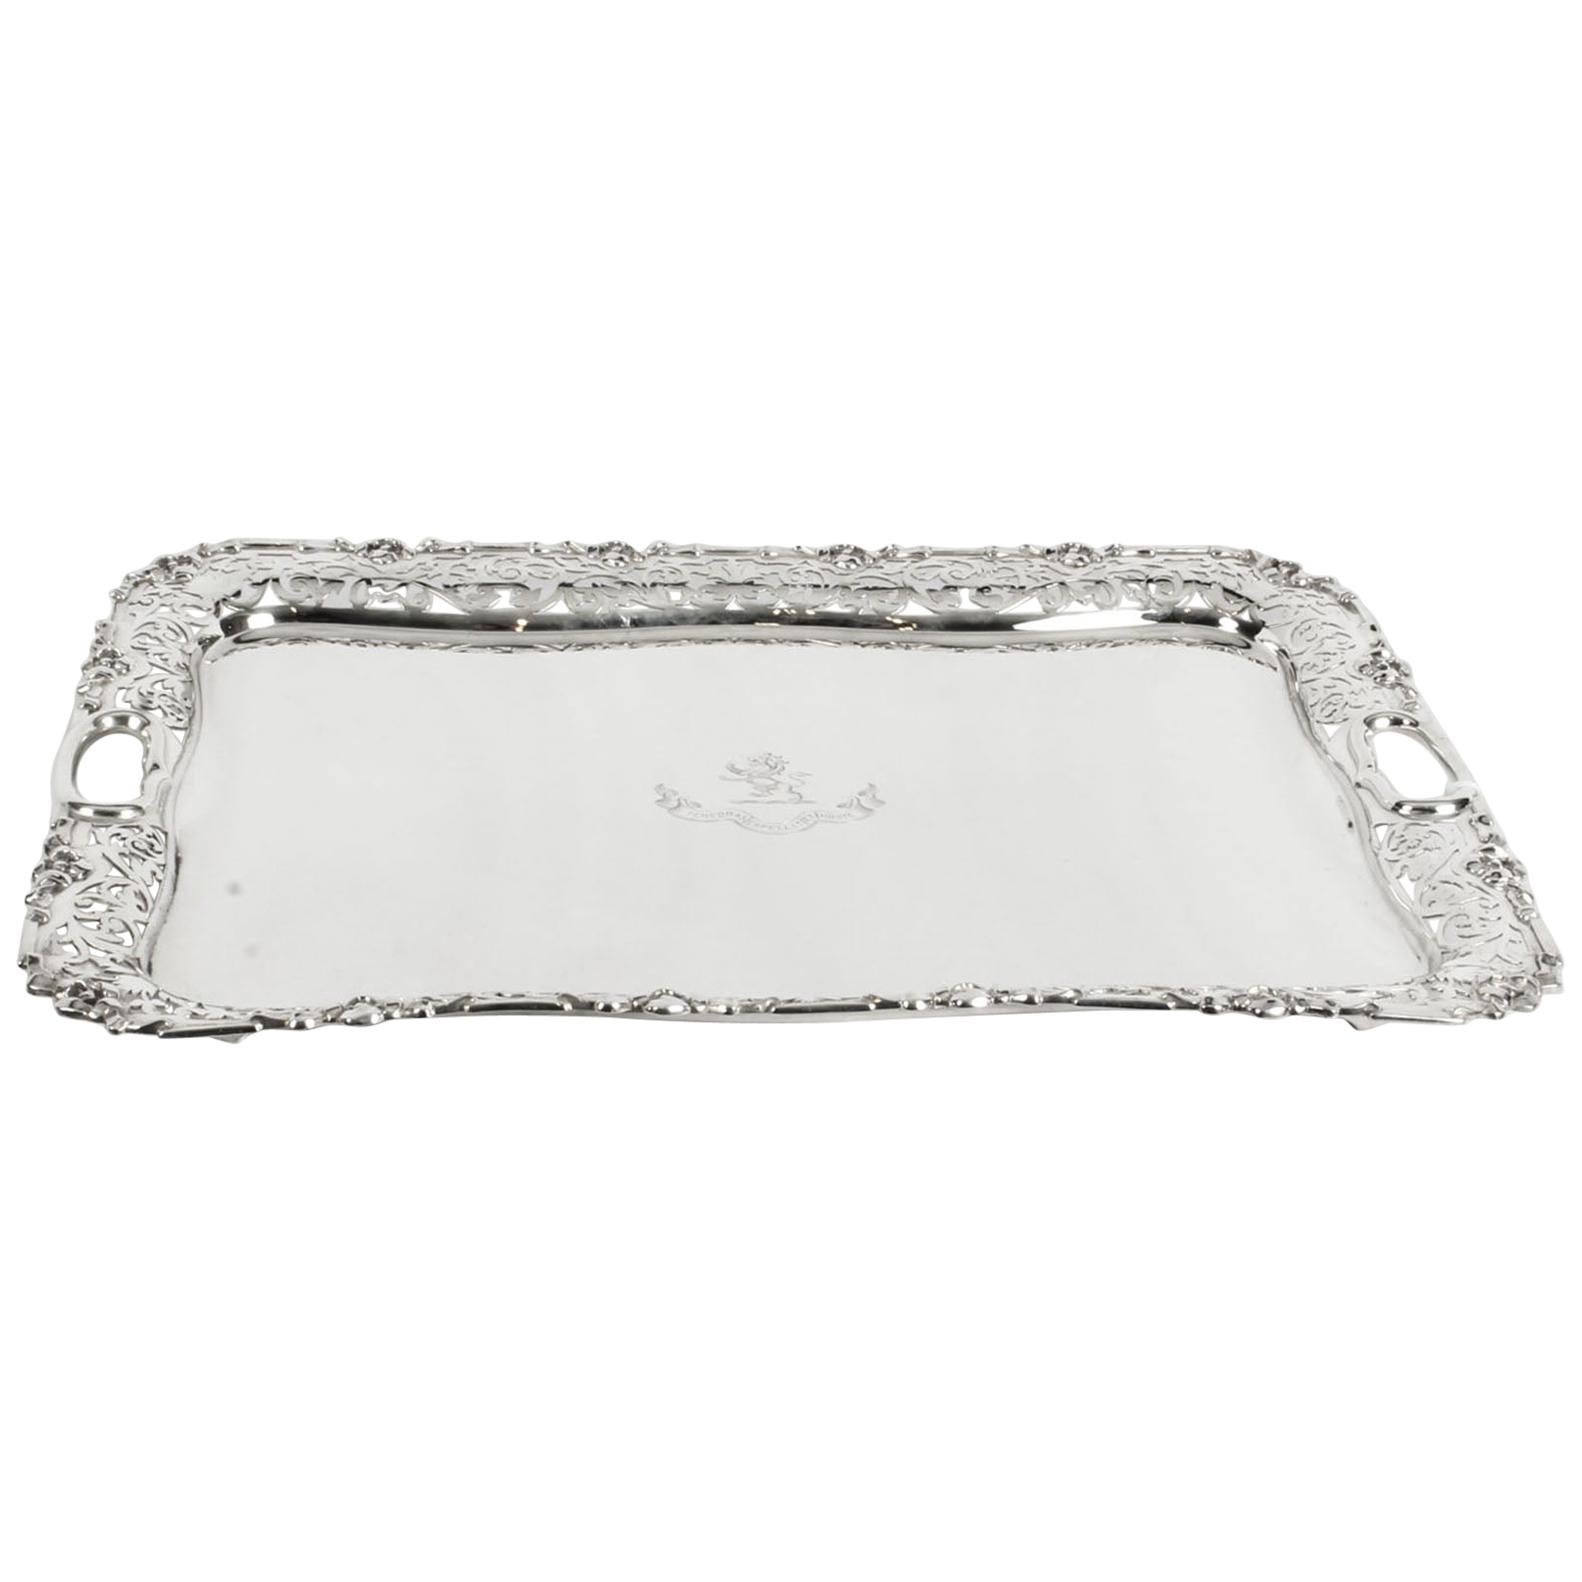 Antique English Silver Plated Twin Handled Tray, 19th Century